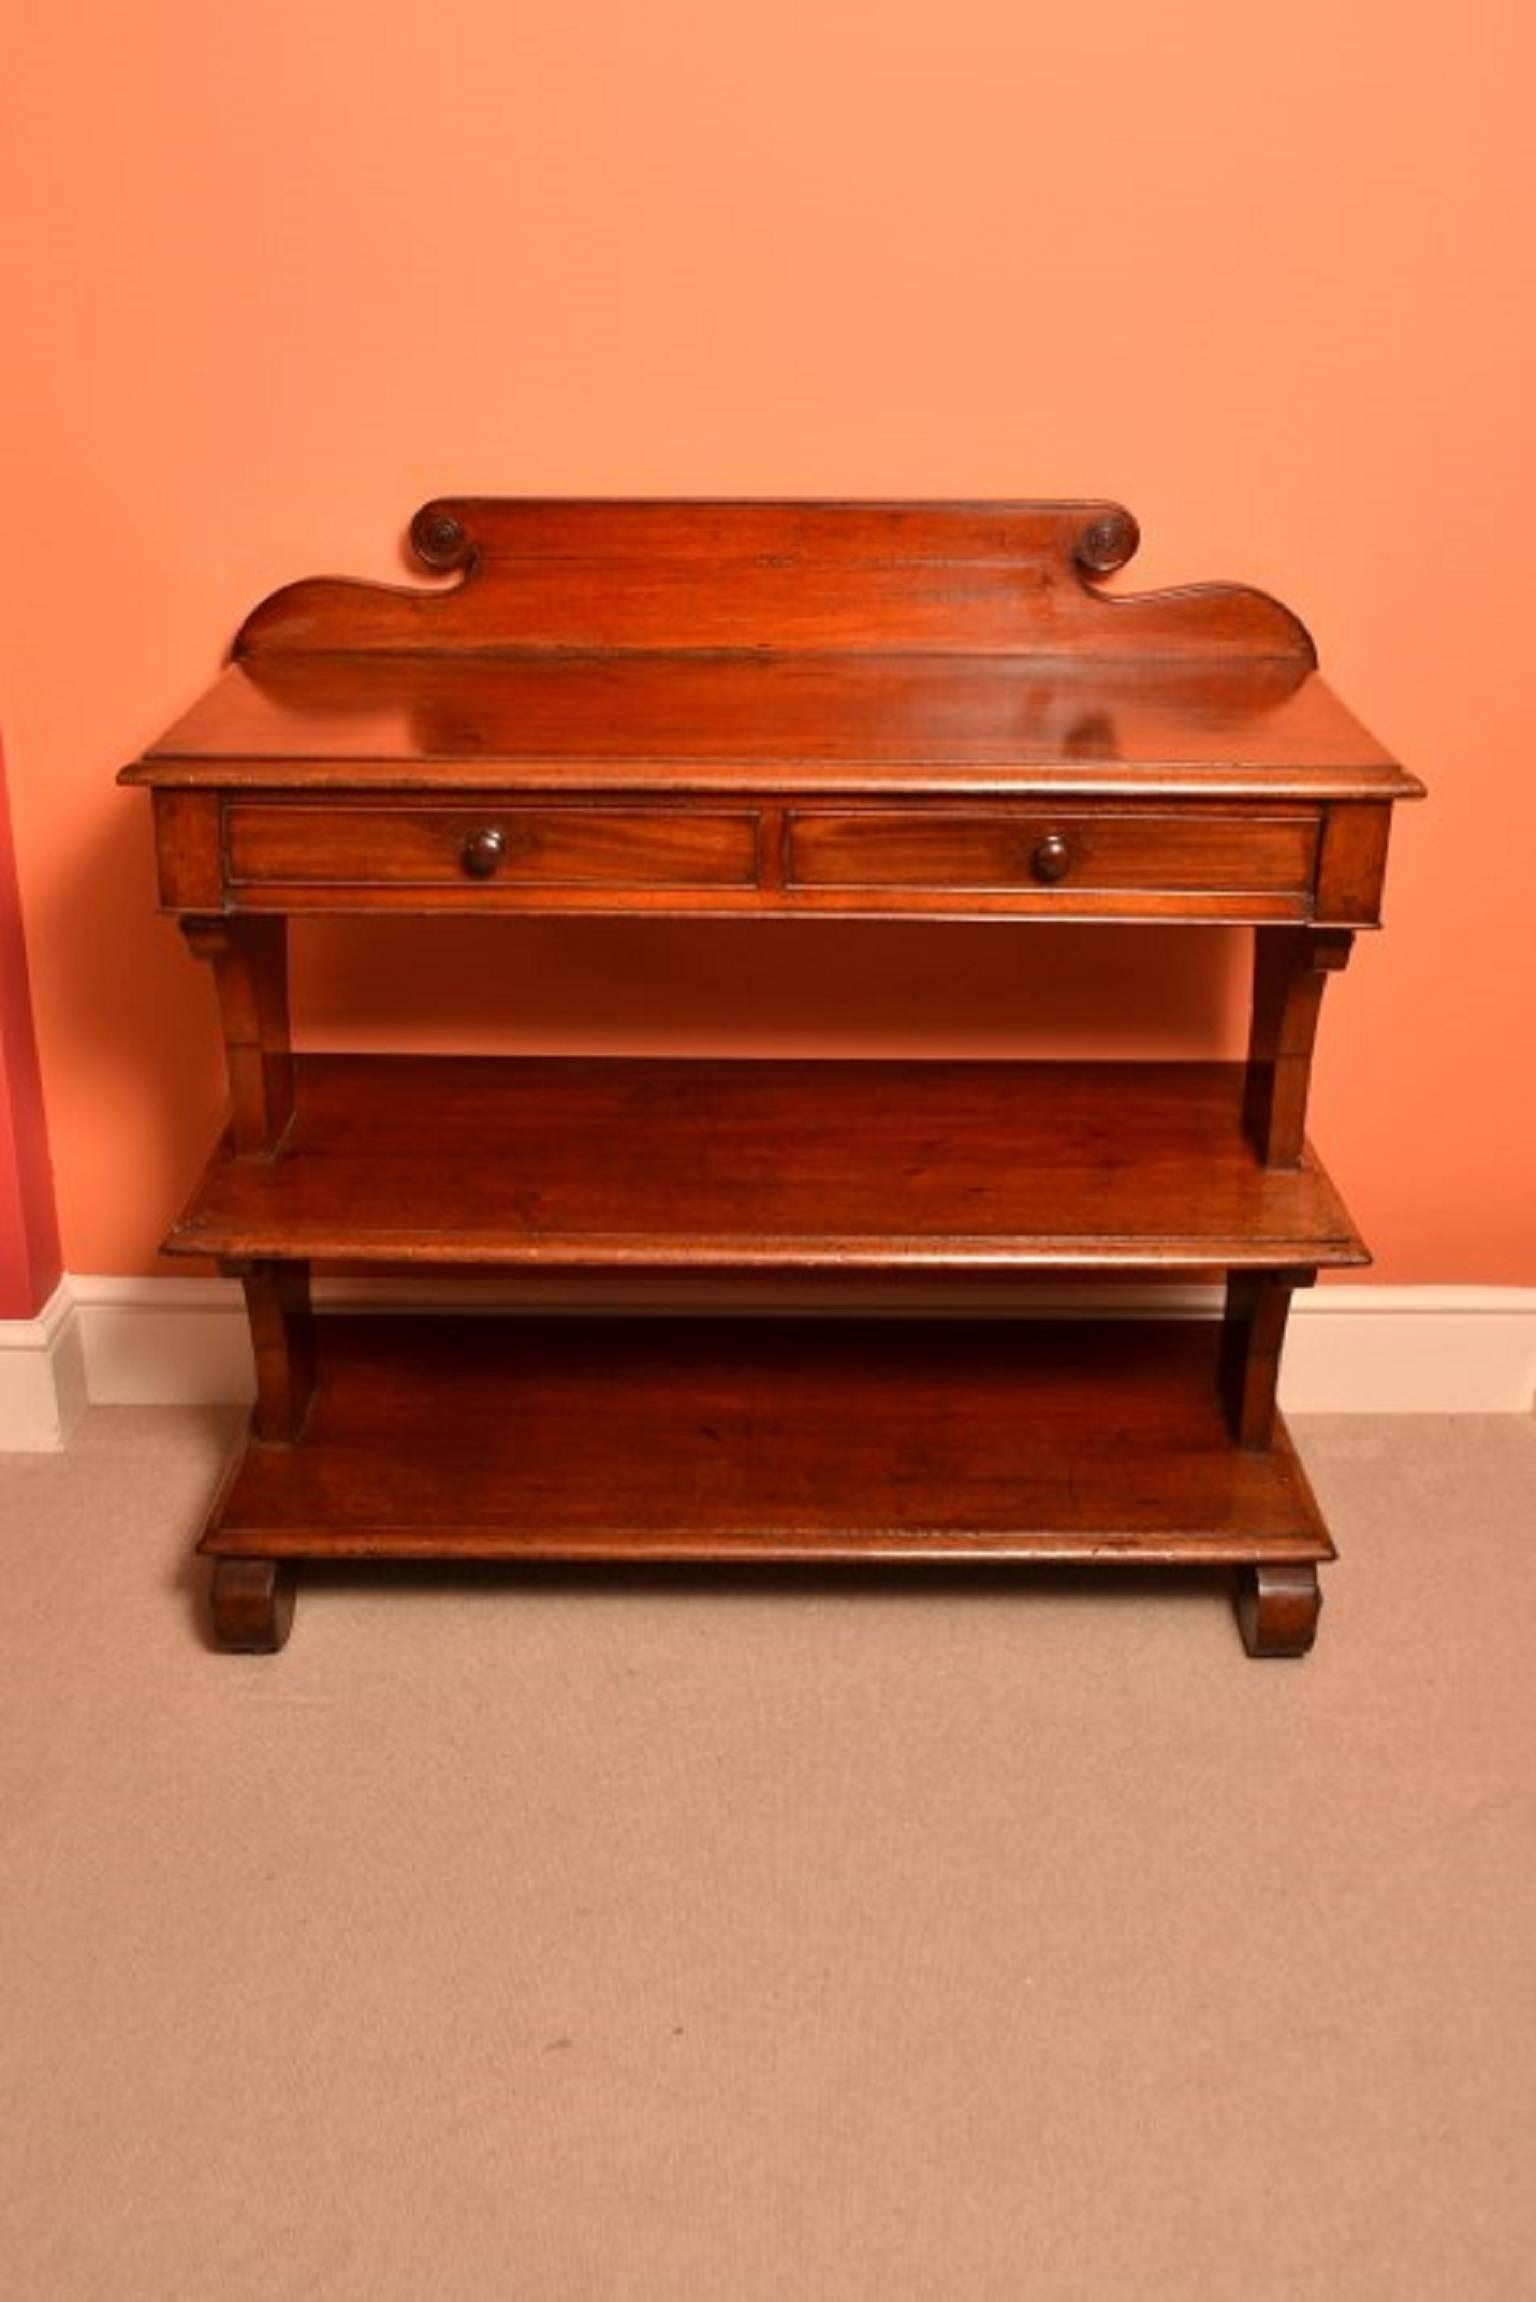 This is an antique Victorian mahogany serving table or buffet, circa 1850 in date.

It is made from mahogany, has a moulded top with twin frieze drawers over two tiered shelves and is raised on beautiful scroll feet.

This is a very unusual item and